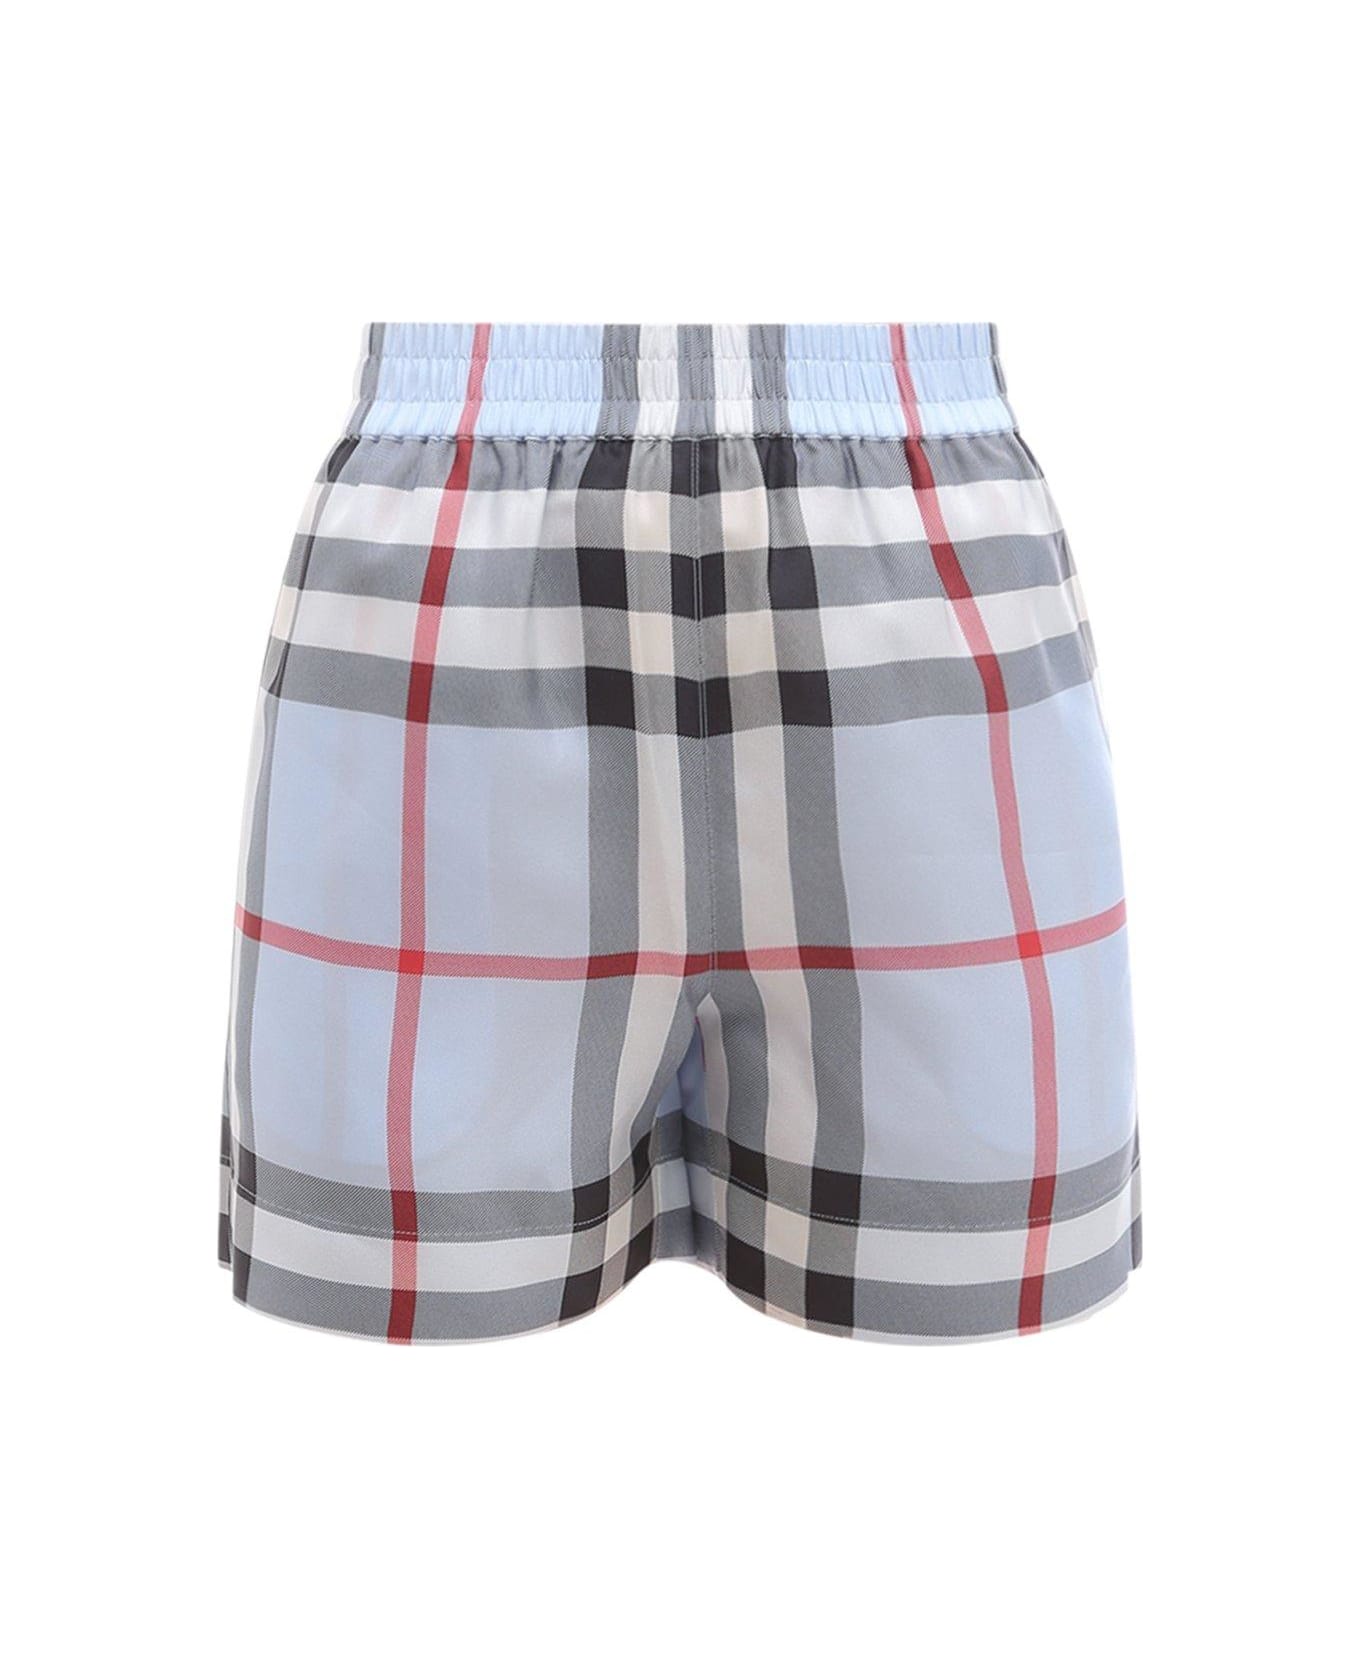 Burberry Check Patterned Bermuda Shorts - BLUE